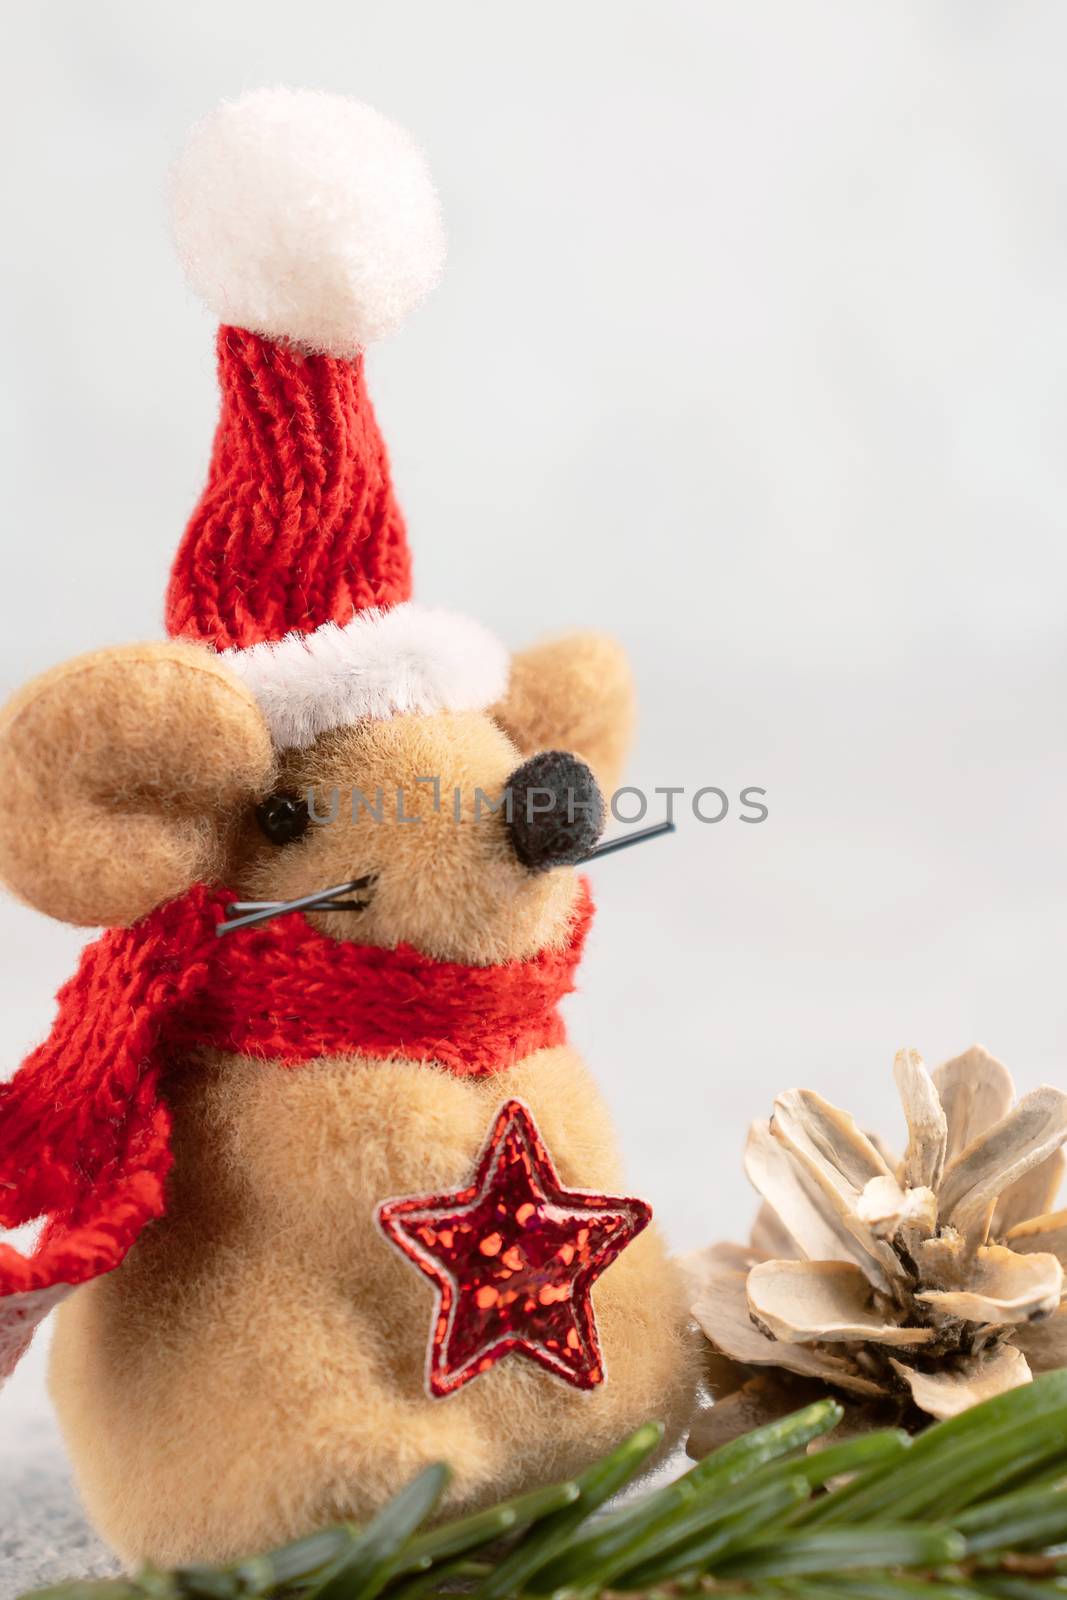 Little toy Christmas mouse, Christmas tree branch and cone. Vertical Christmas composition with the symbol of 2020 according to the Chinese horoscope by galsand